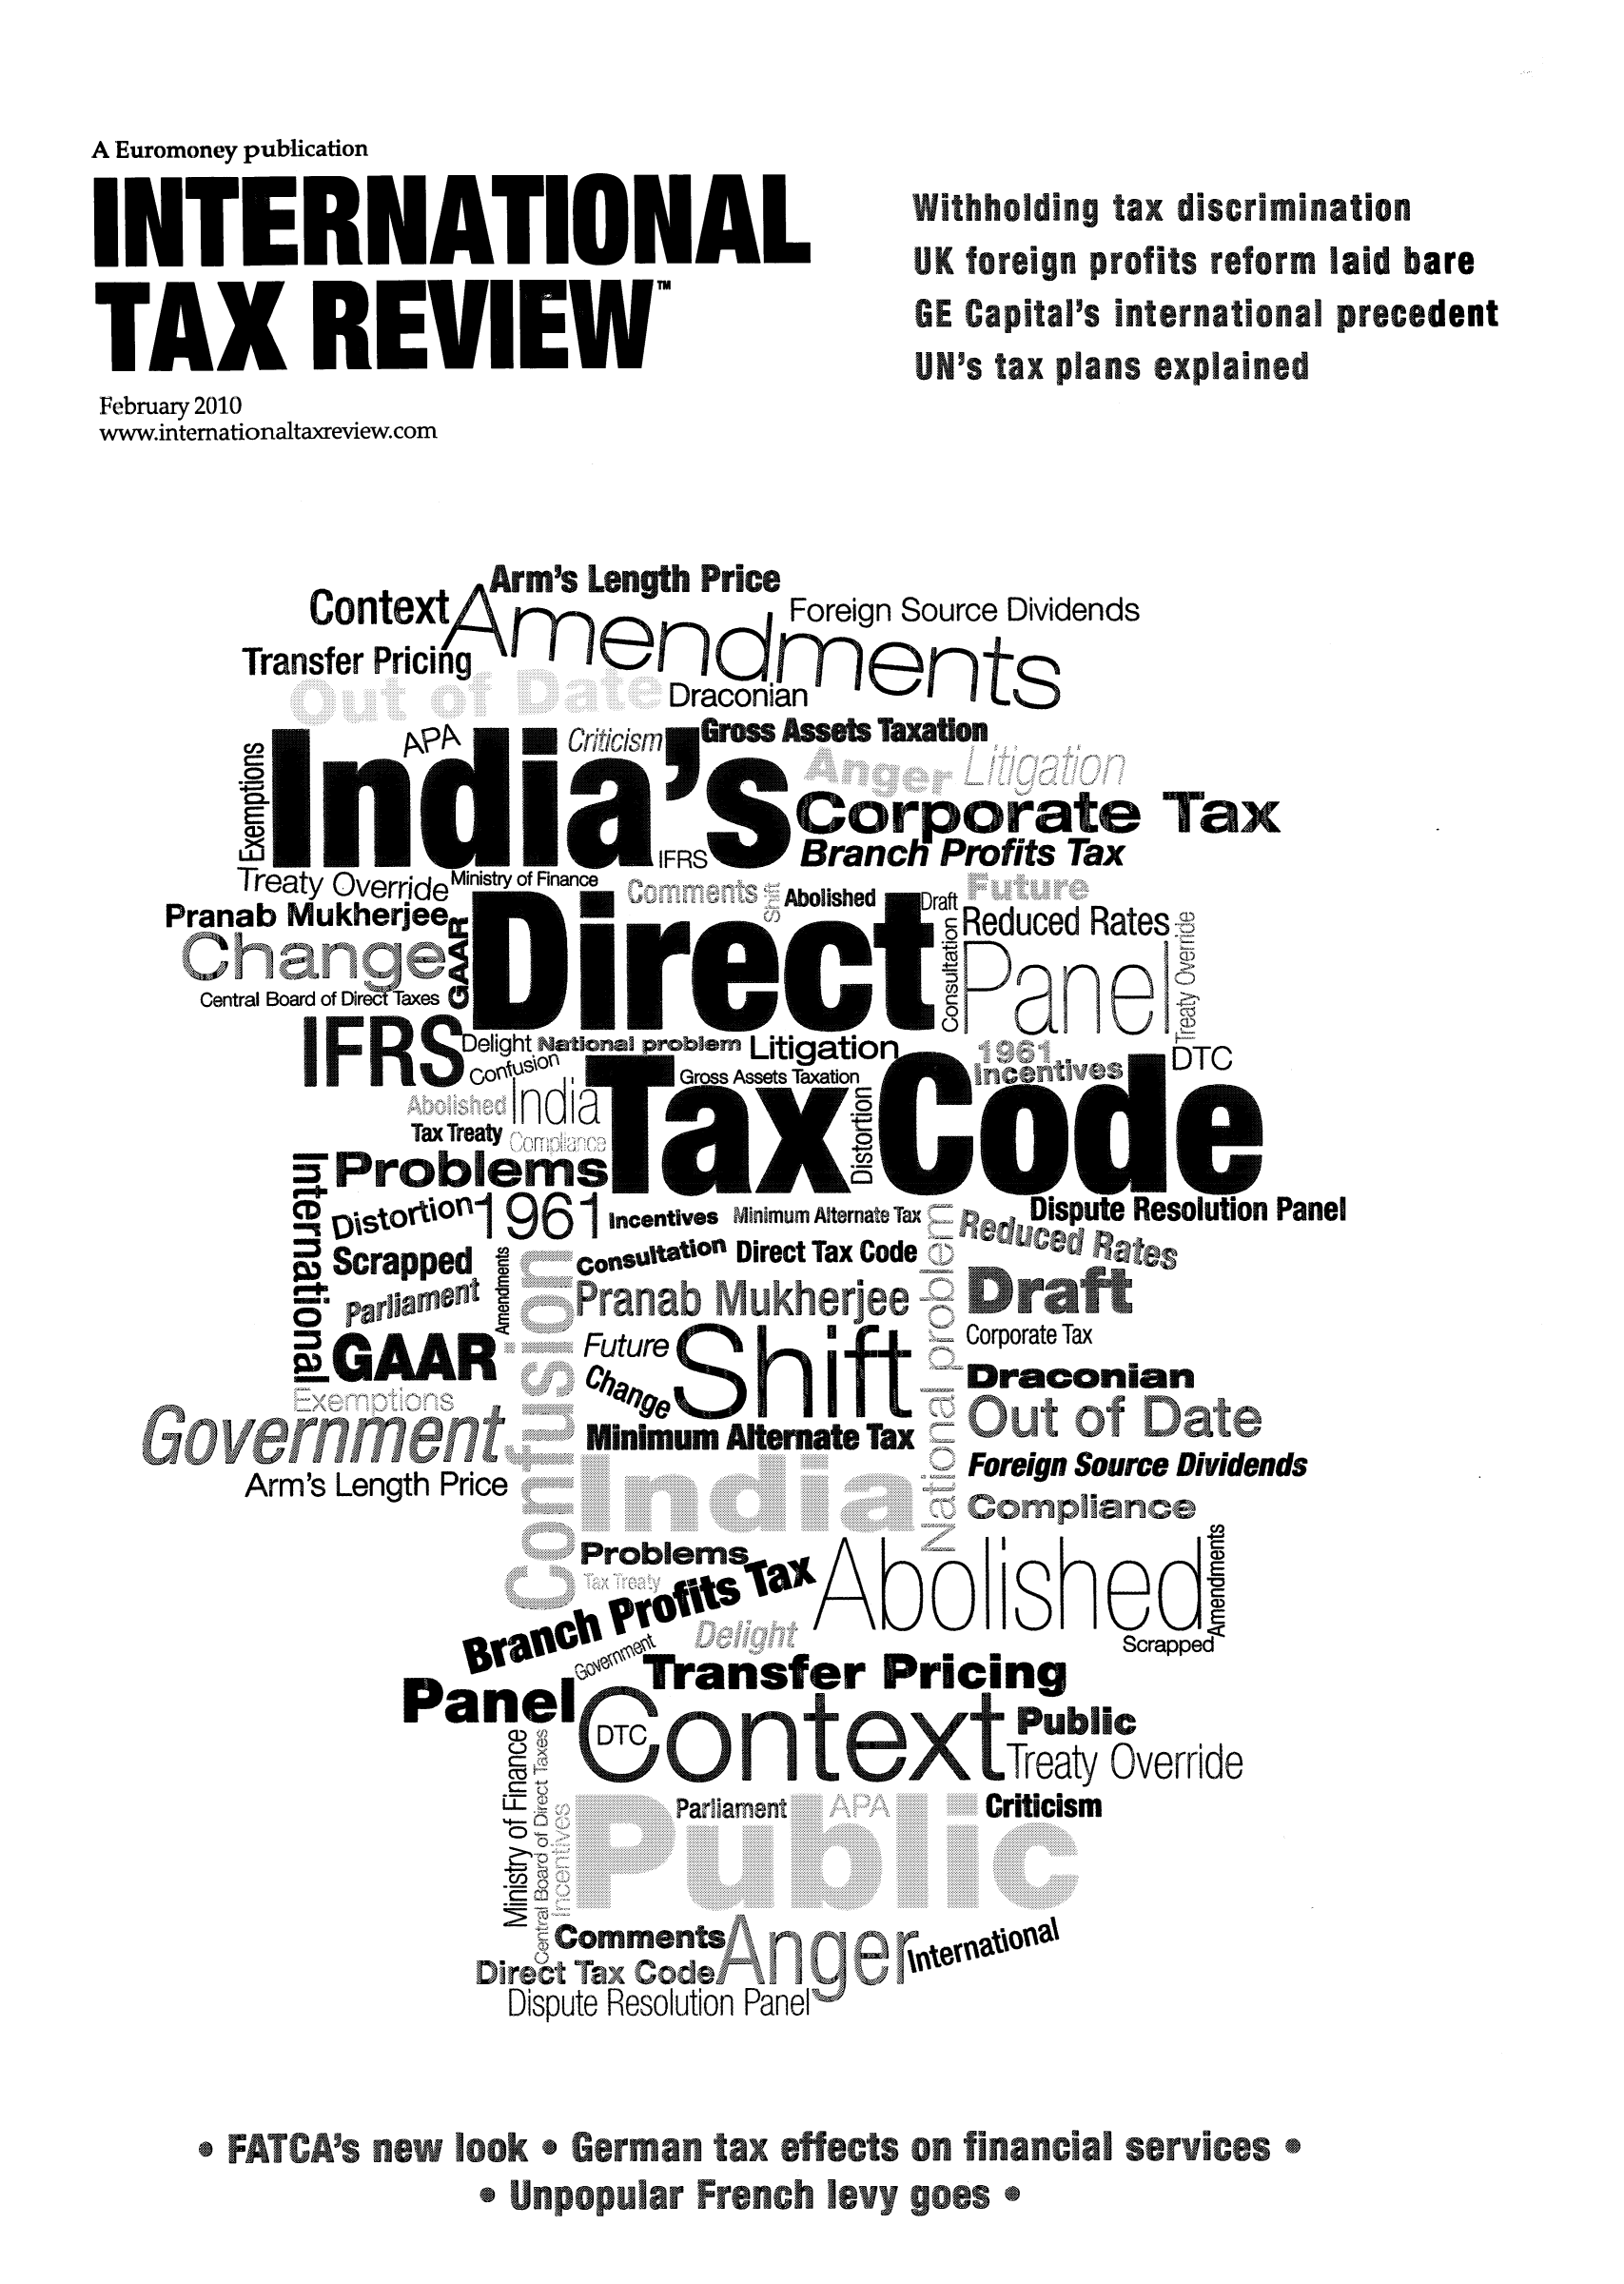 handle is hein.journals/intaxr21 and id is 1 raw text is: A Euromoney publication
INTERNATIONAL                                  Withholding tax discrimination
rN         UK foreign profiots reform laid bare
TA     X     R  EV     IEWGE Capitals internationalprecedent
UN's tax plans explained
February 2010
www.intemationaltaxreview.com
Contt      rsForeign Source Dividends
Transfer Pricing
Draconian
Coprt Tuax
IFRds   Brafnch Pm fits Tax
Treaty OverrideMinistry of Finance  Coished  Draft  Re
Pranab Mukherjee                   a          Reduced Rates
Central Board of DrecDTaxes  r e
Delight Nat onal problernLitigatioDT
Co0u0on    Gross Assets Taxation
Problems R
'tOtti   961cetis minimum Alternate Tax  Dispute Resolution Panel
Scrapped I    Co nquiae** Direct Tax Code C
Admil, AN&Corporate Tax
n                     Draconian
Minimum   ernate Tax
Arm's Length                              Foreign Source Dividends
%o~saAbo shedI
~a~loT fansfer Pricing              Srpe
aTreatyxOverride
A sn cPa .ame.           Criticism
..     ..0. . . . . .... . .  . . . . .  .
..          . .  . .. . .  . . )C m l a c

Dispute Resolution Panel
*FATCA's neo on *Gerrnan tax effects on fnancial services*
* Unpopular French evy goes *


